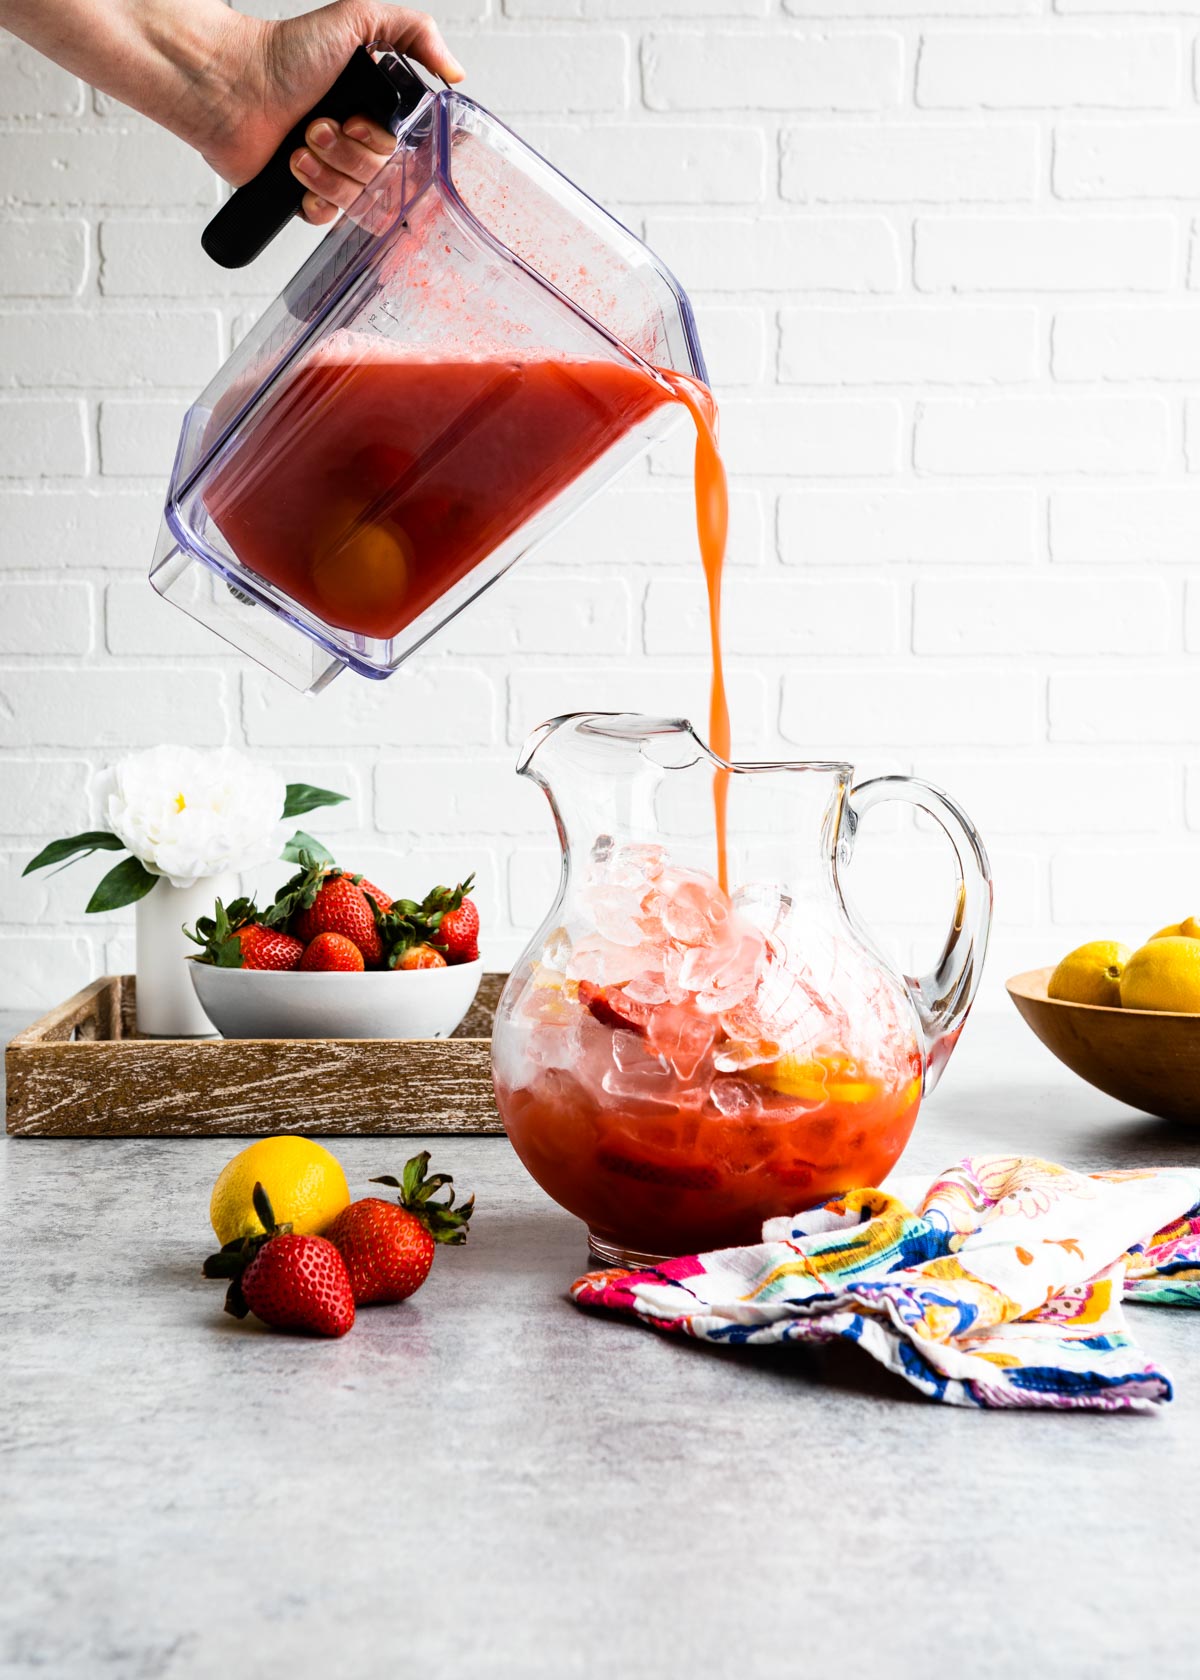 pouring homemade strawberry lemonade from the blender to a glass pitcher full of ice.